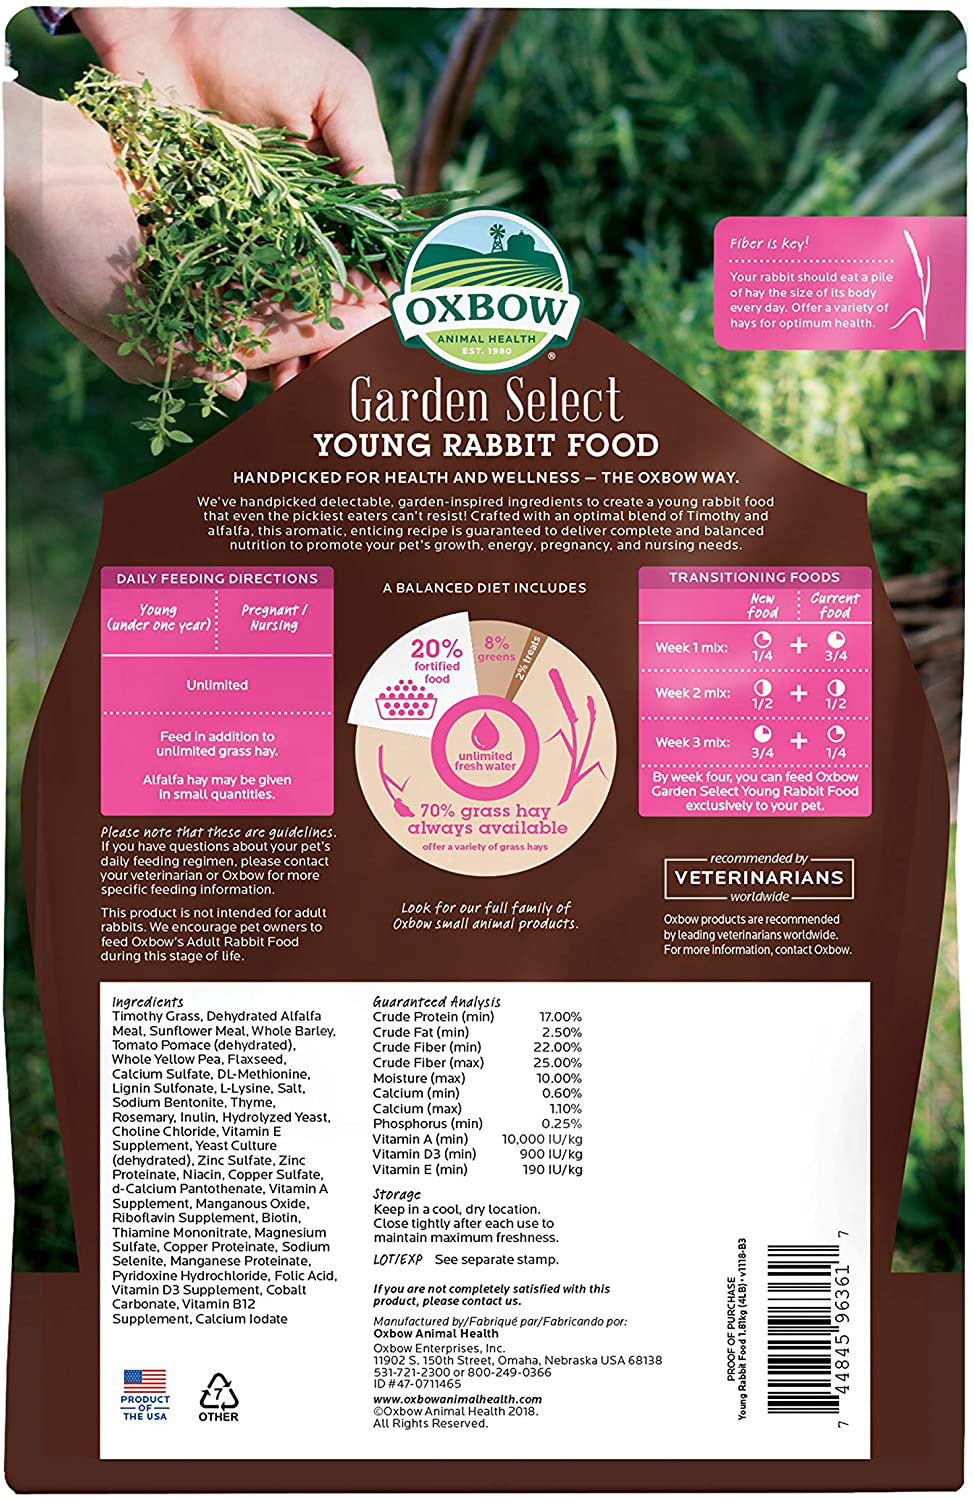 Oxbow Animal Health Garden Select Young Rabbit Food, Garden-Inspired Recipe for Young Rabbits, No Soy or Wheat, Non-Gmo, Made in the USA, 4 Pound Bag